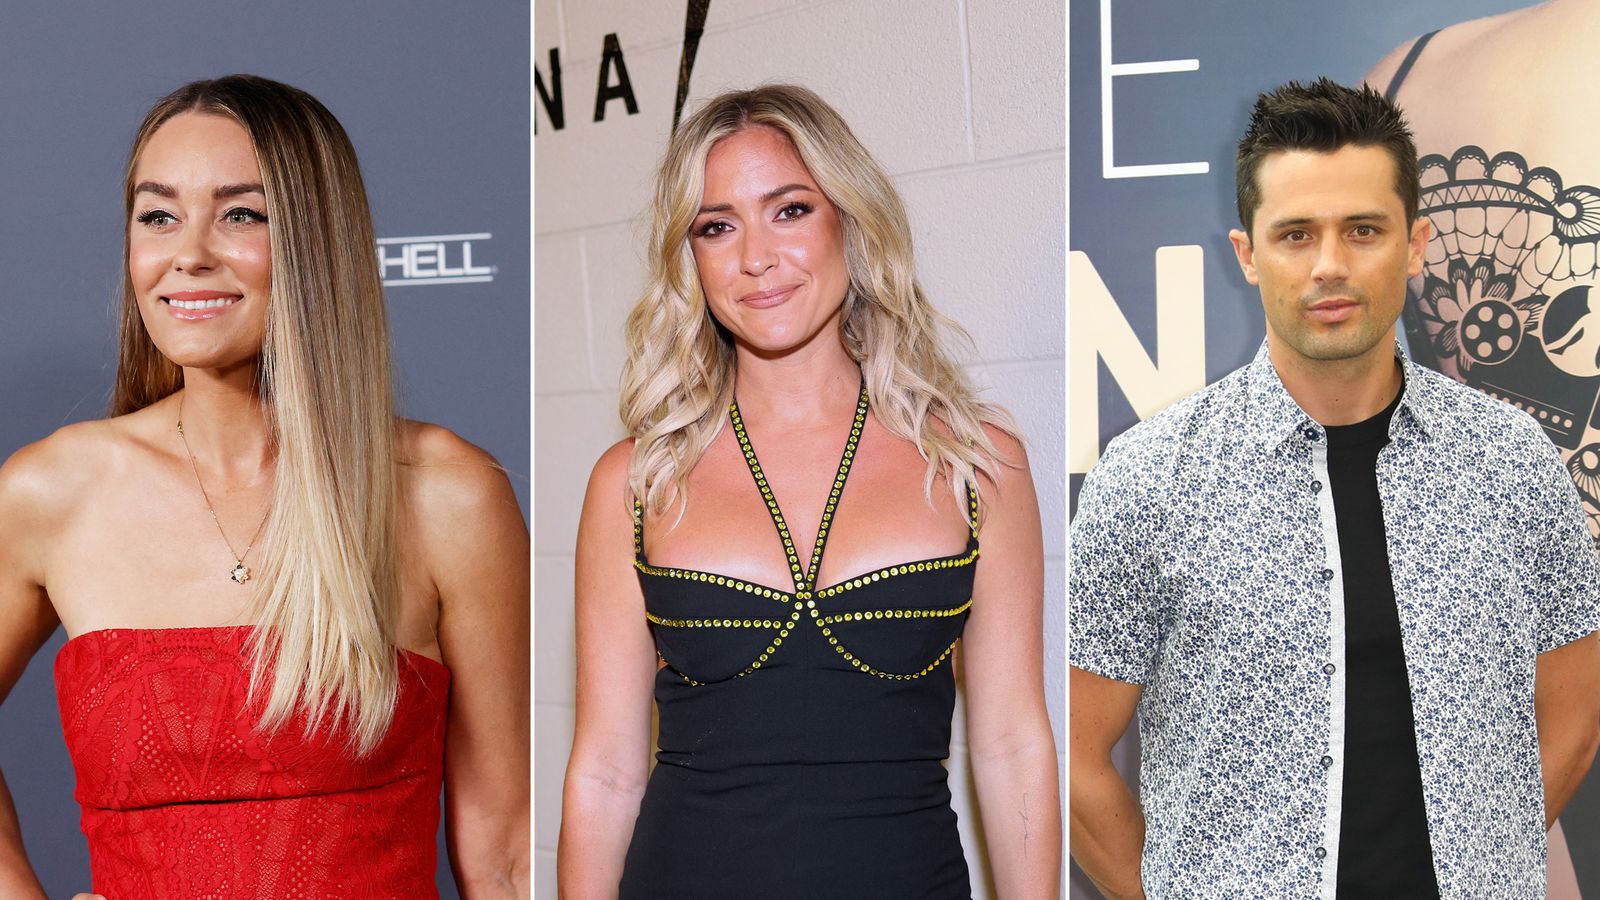 Lauren Conrad Returns To MTV With A Series About Her New Clothing